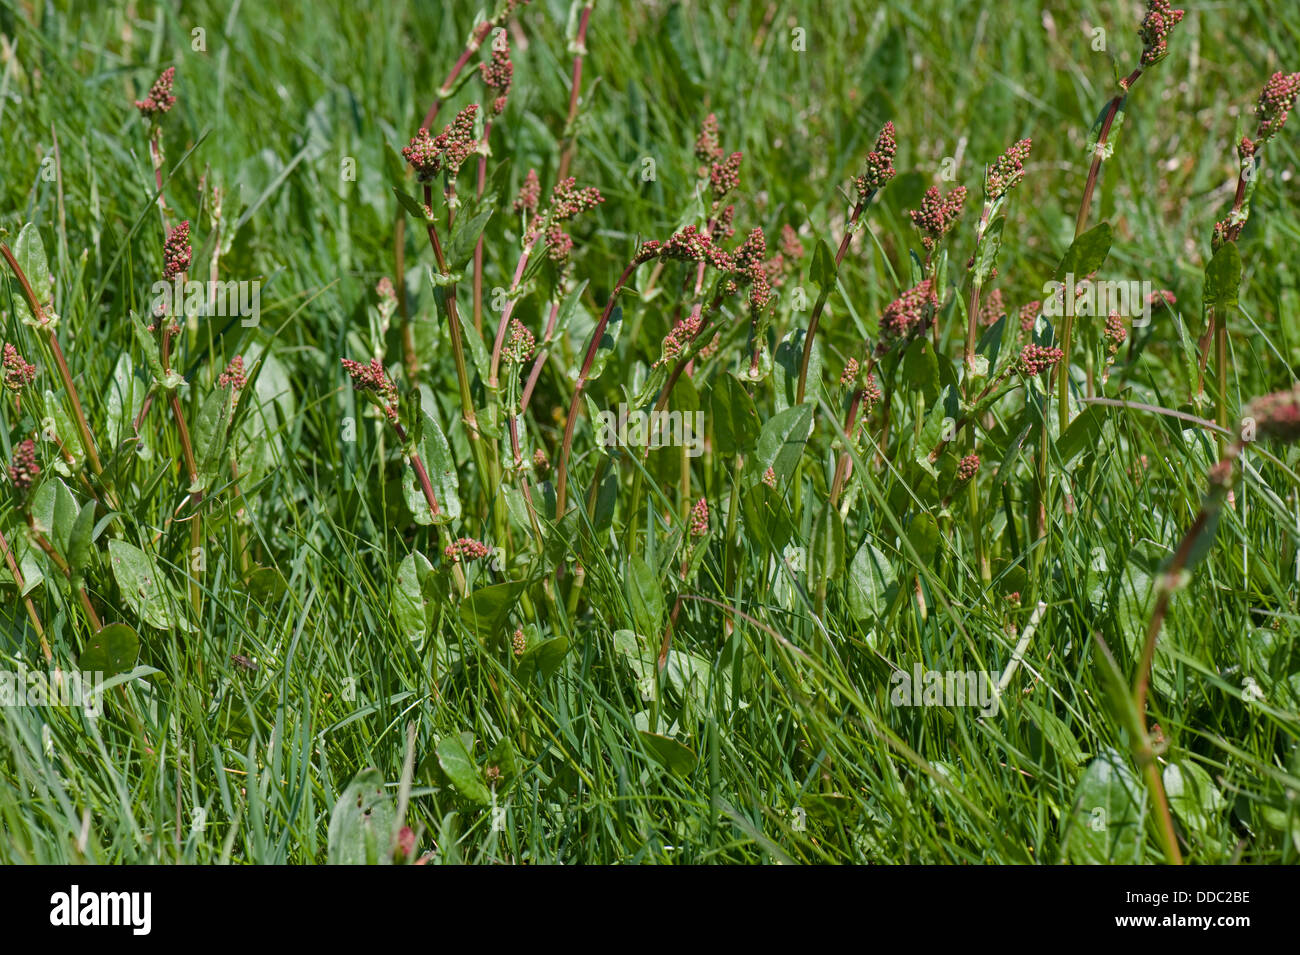 Sheep's sorrel, Rumex acetosella, plants in red bud in a meadow Stock Photo